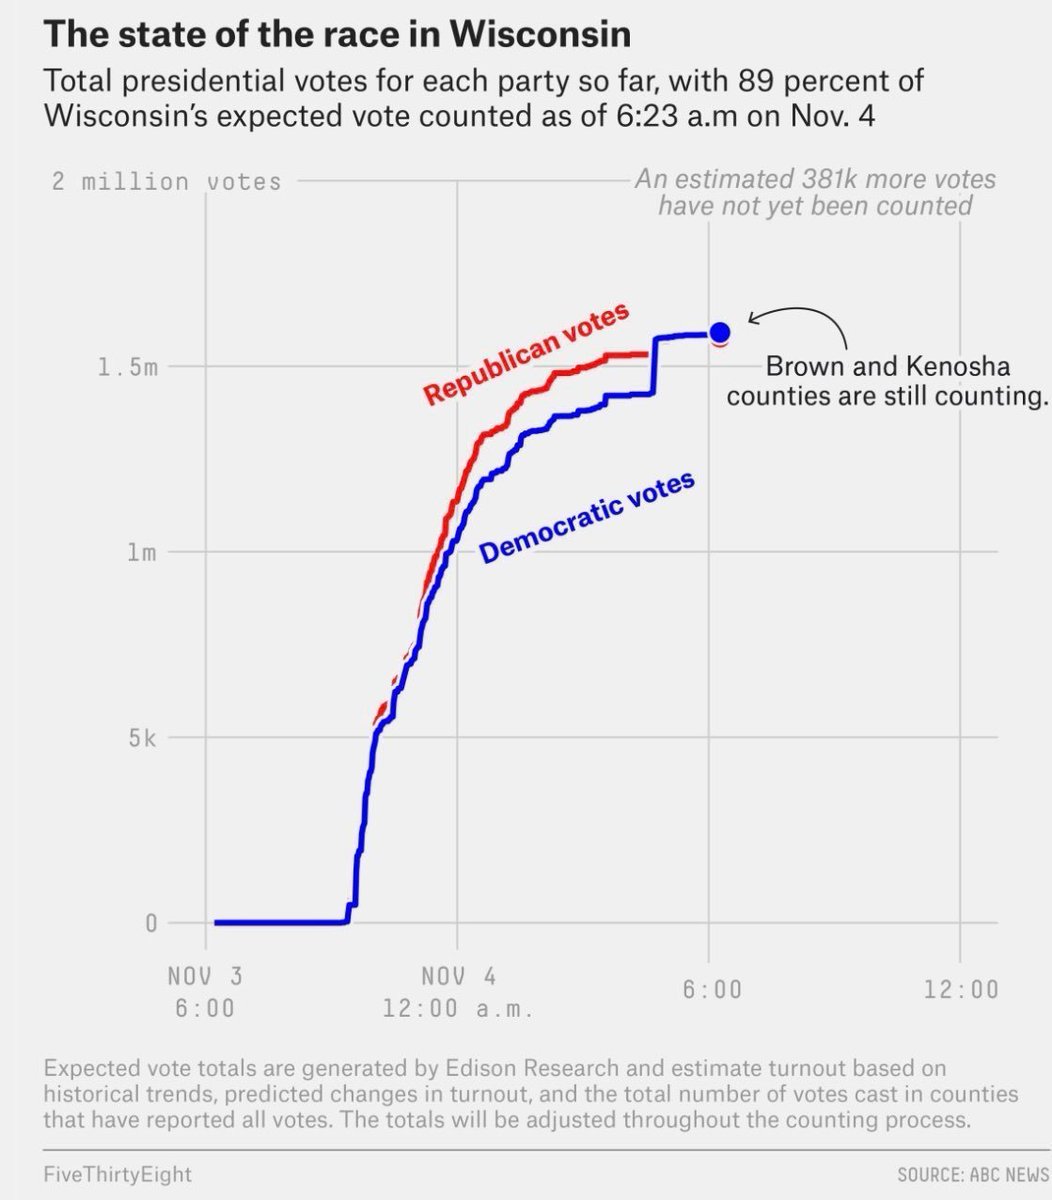 I've started to see this image crop up in GOP circles as a shorthand for the election fraud that they claim took place in Wisconsin and other states. This is the FiveThirtyEight chart it's a play on. See if you can spot the difference!